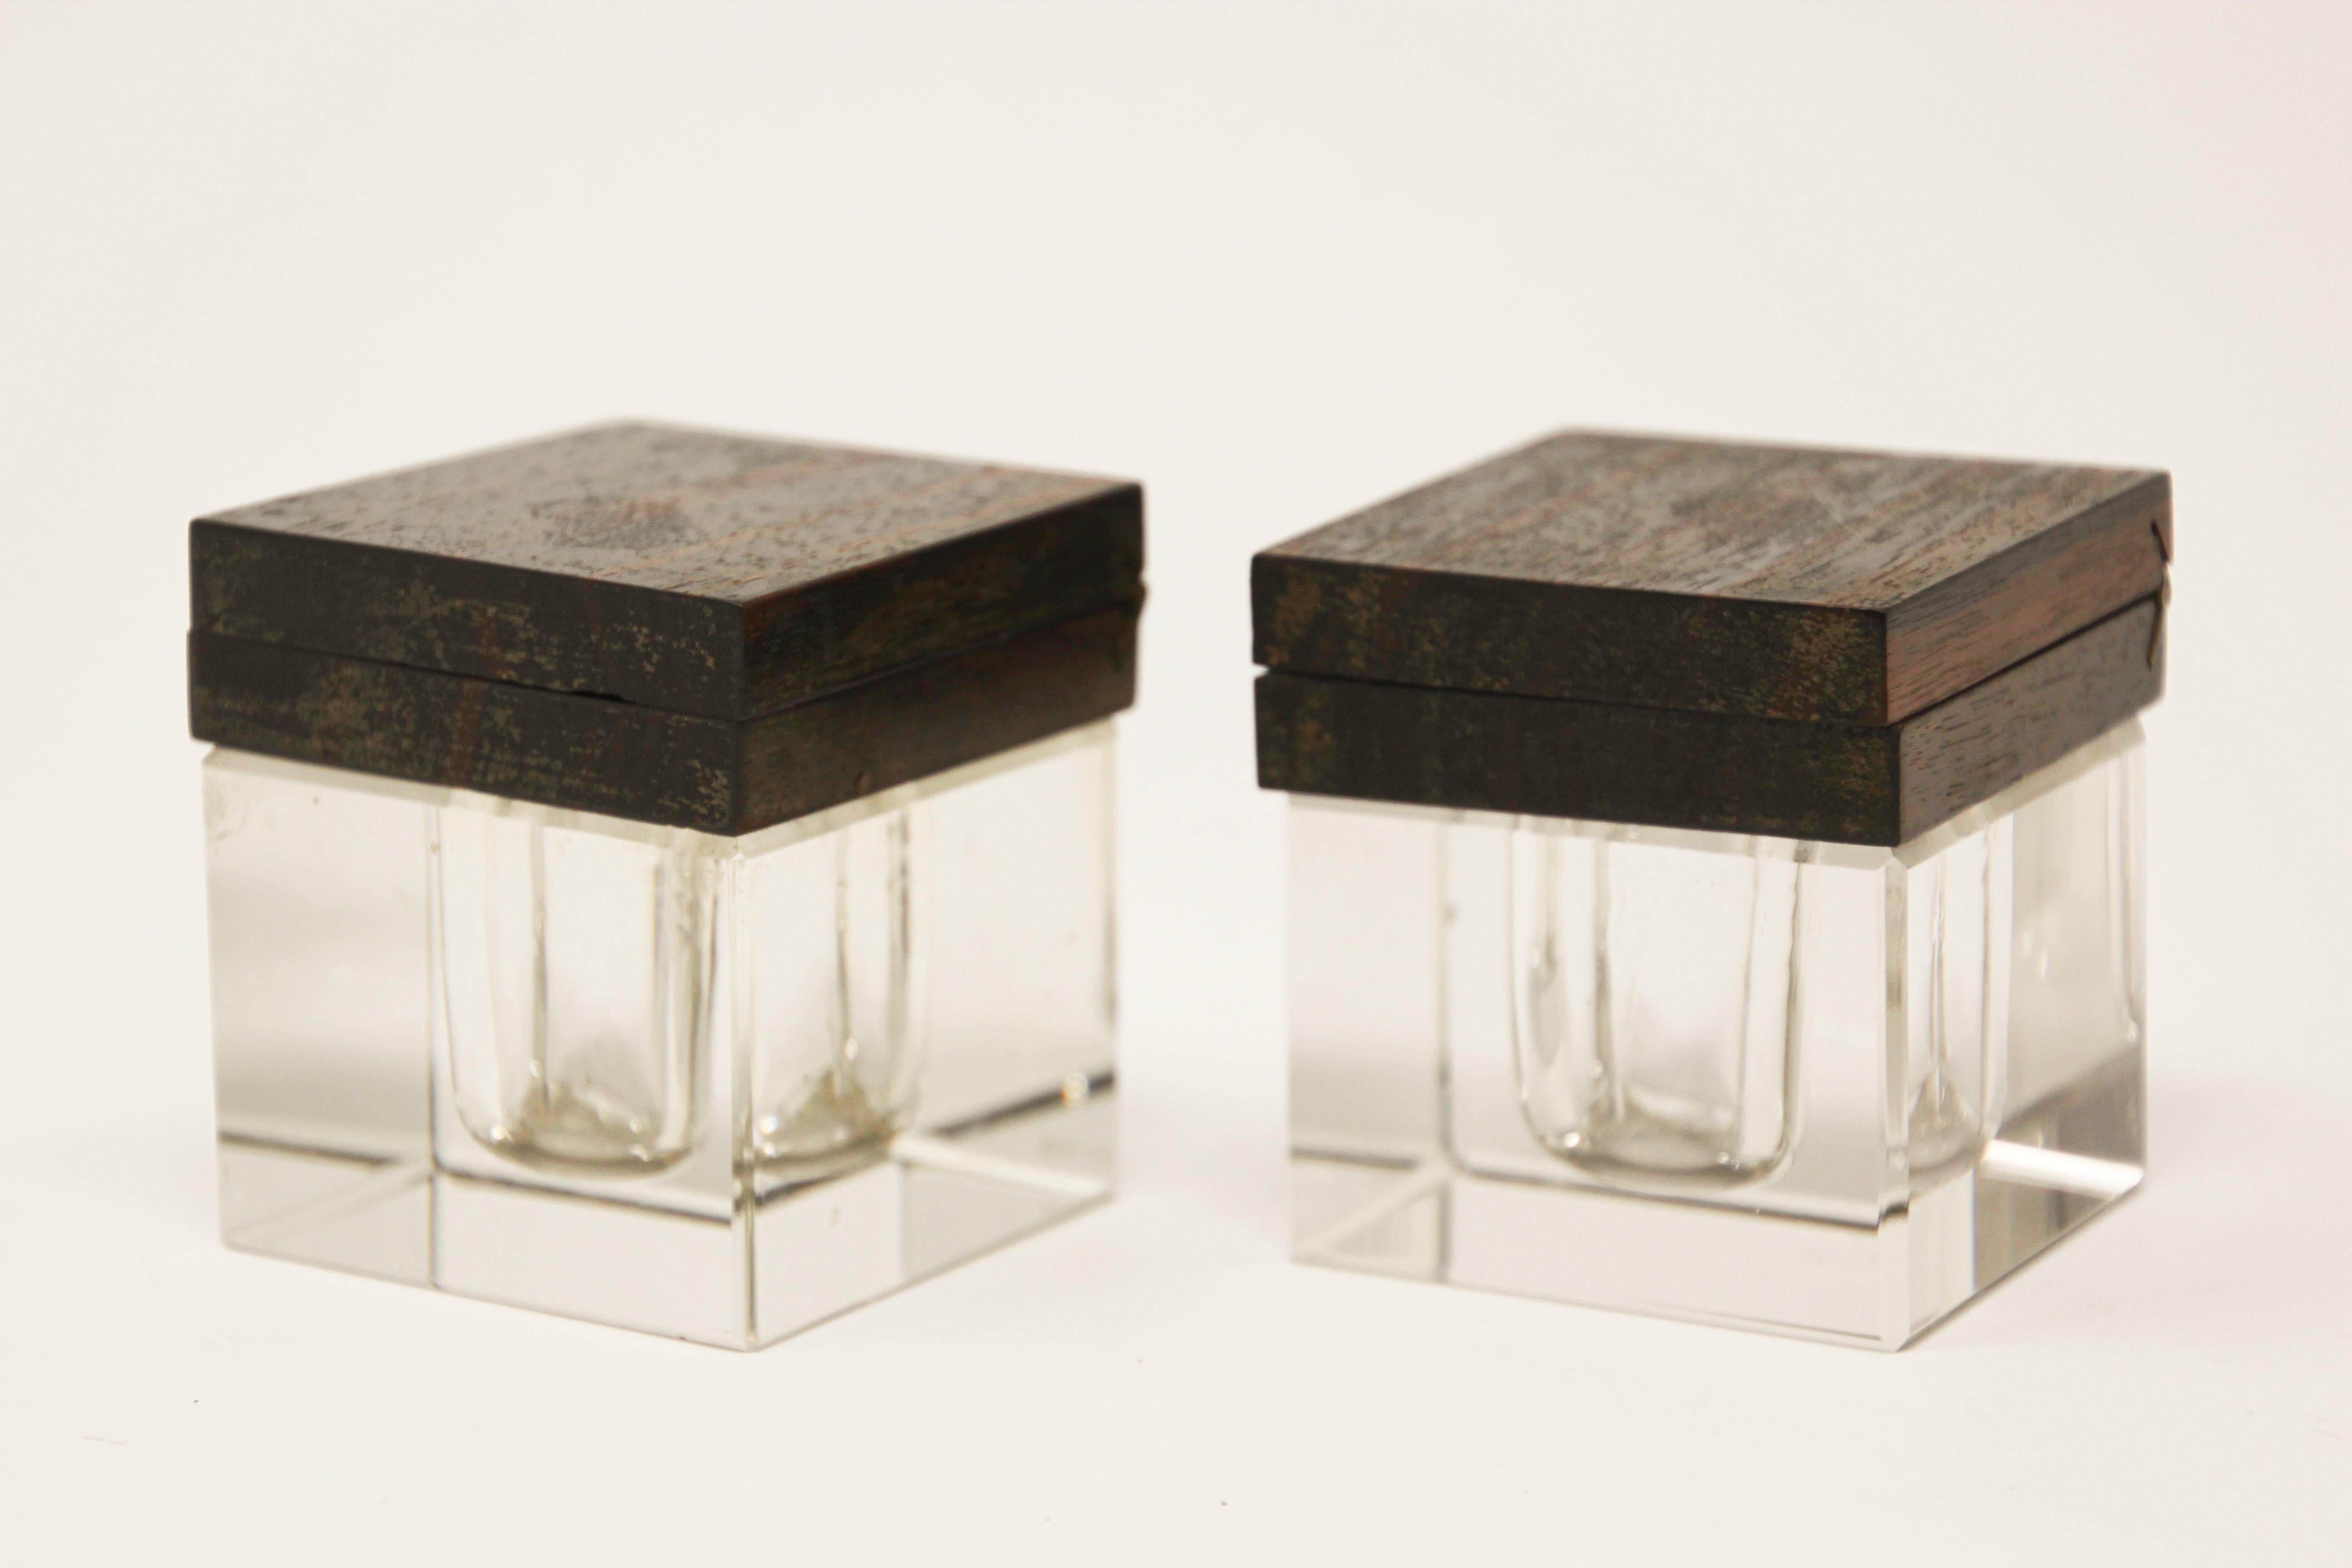 French Macassar inkwell Art Deco ebony Macassar and crystal glass.
Macassar ebony cover with a crystal reservoir in Cubist Art Deco form.
Made in luxury Macassar wood with original crystal glass inkwells.
Glass inkwells with brass hinged lids and